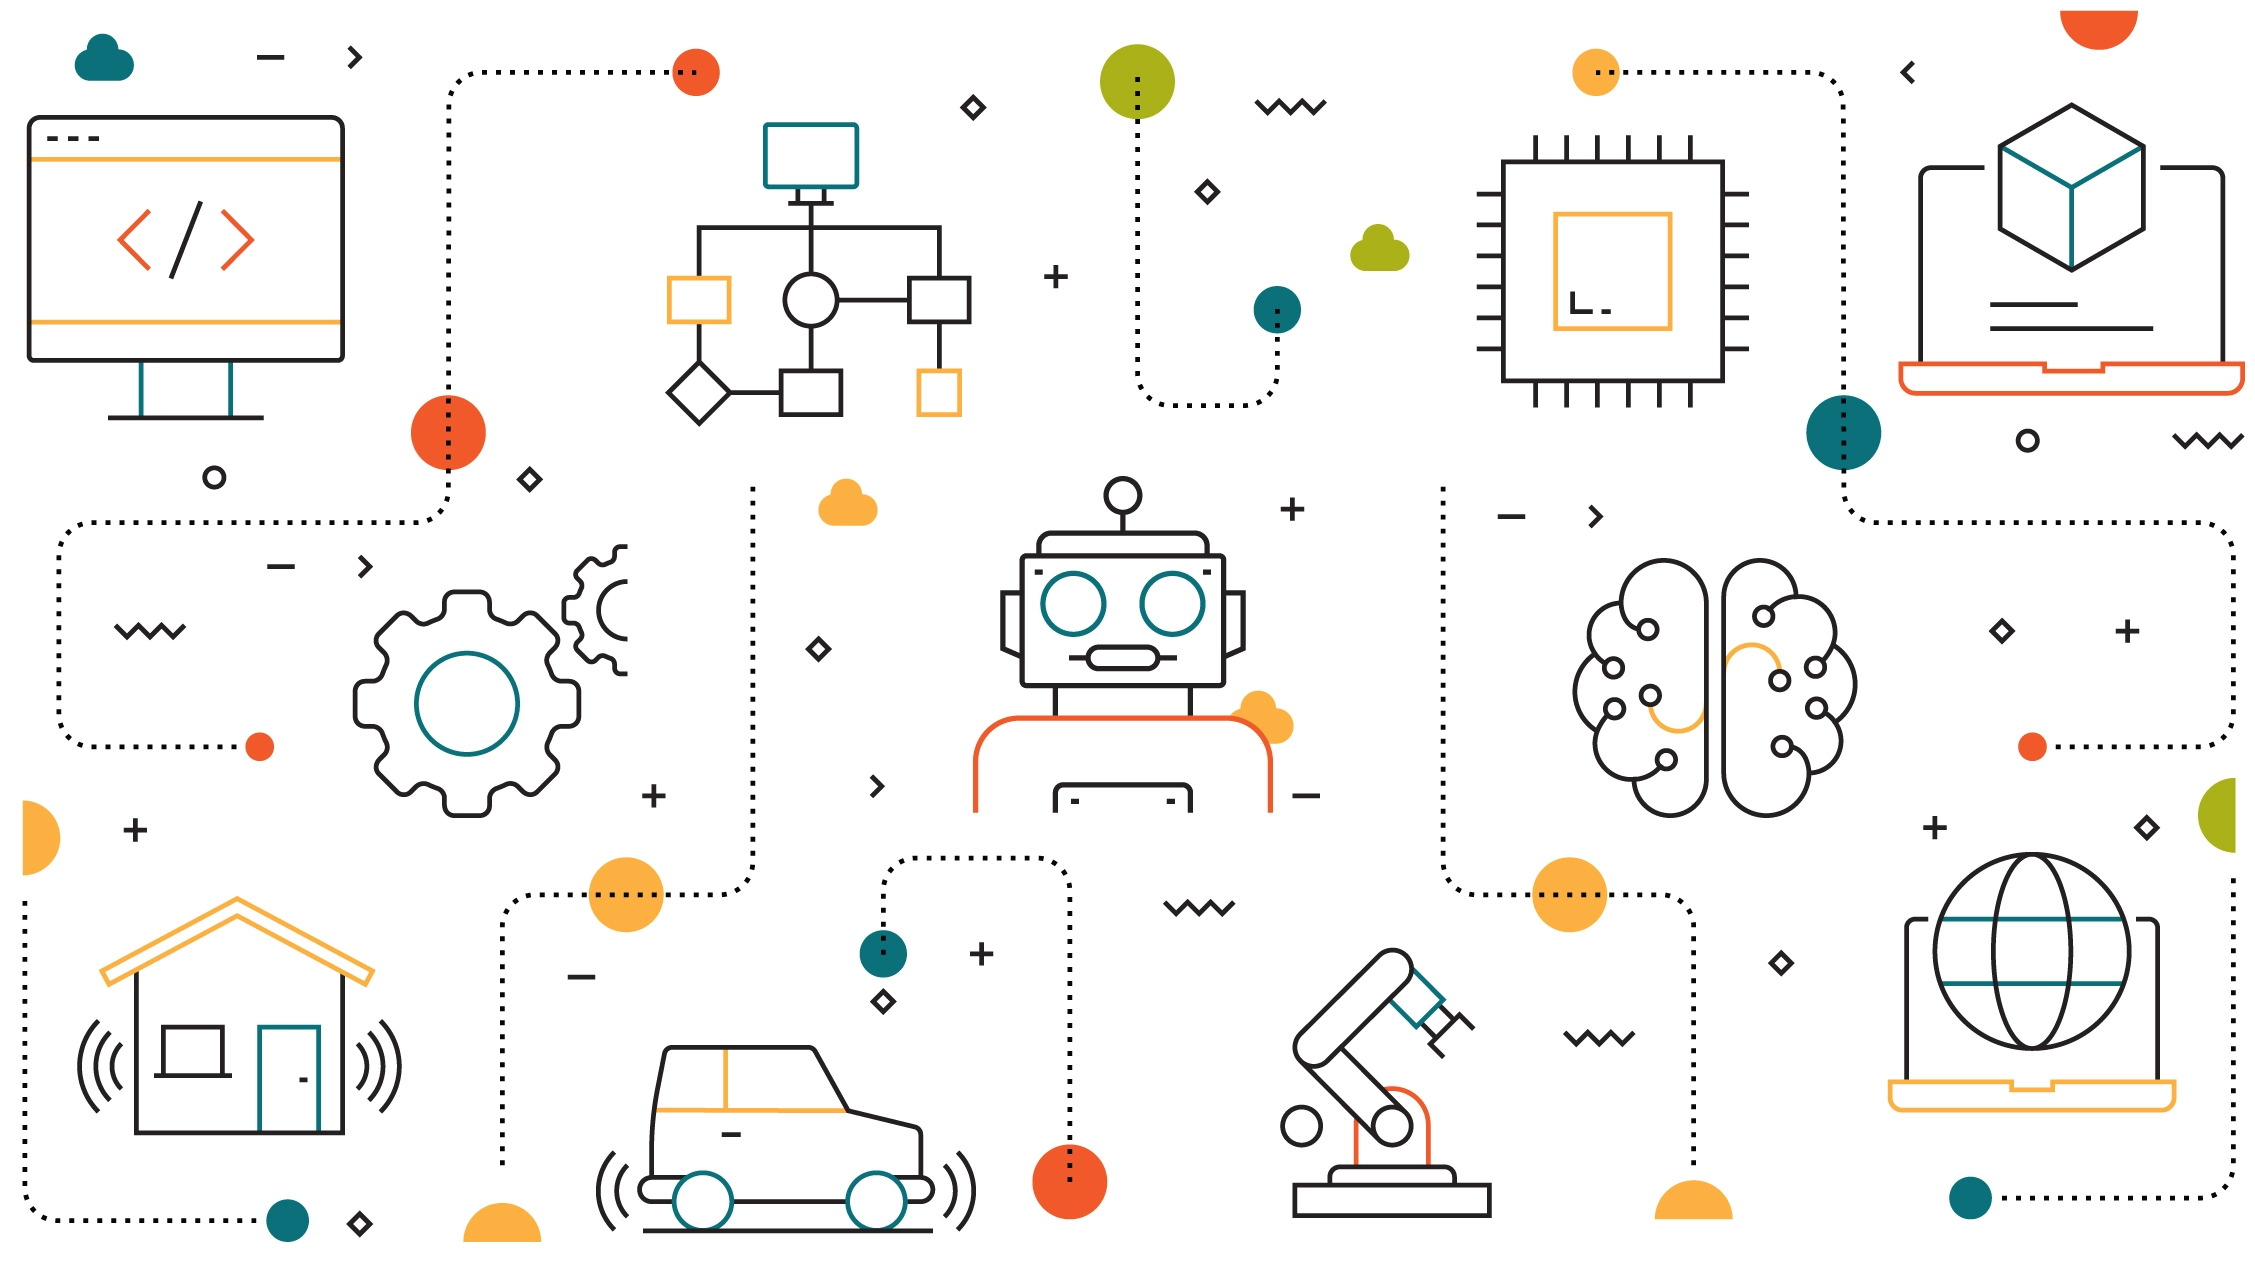 Illustration representing the connection AI has to cars, home, computers and science